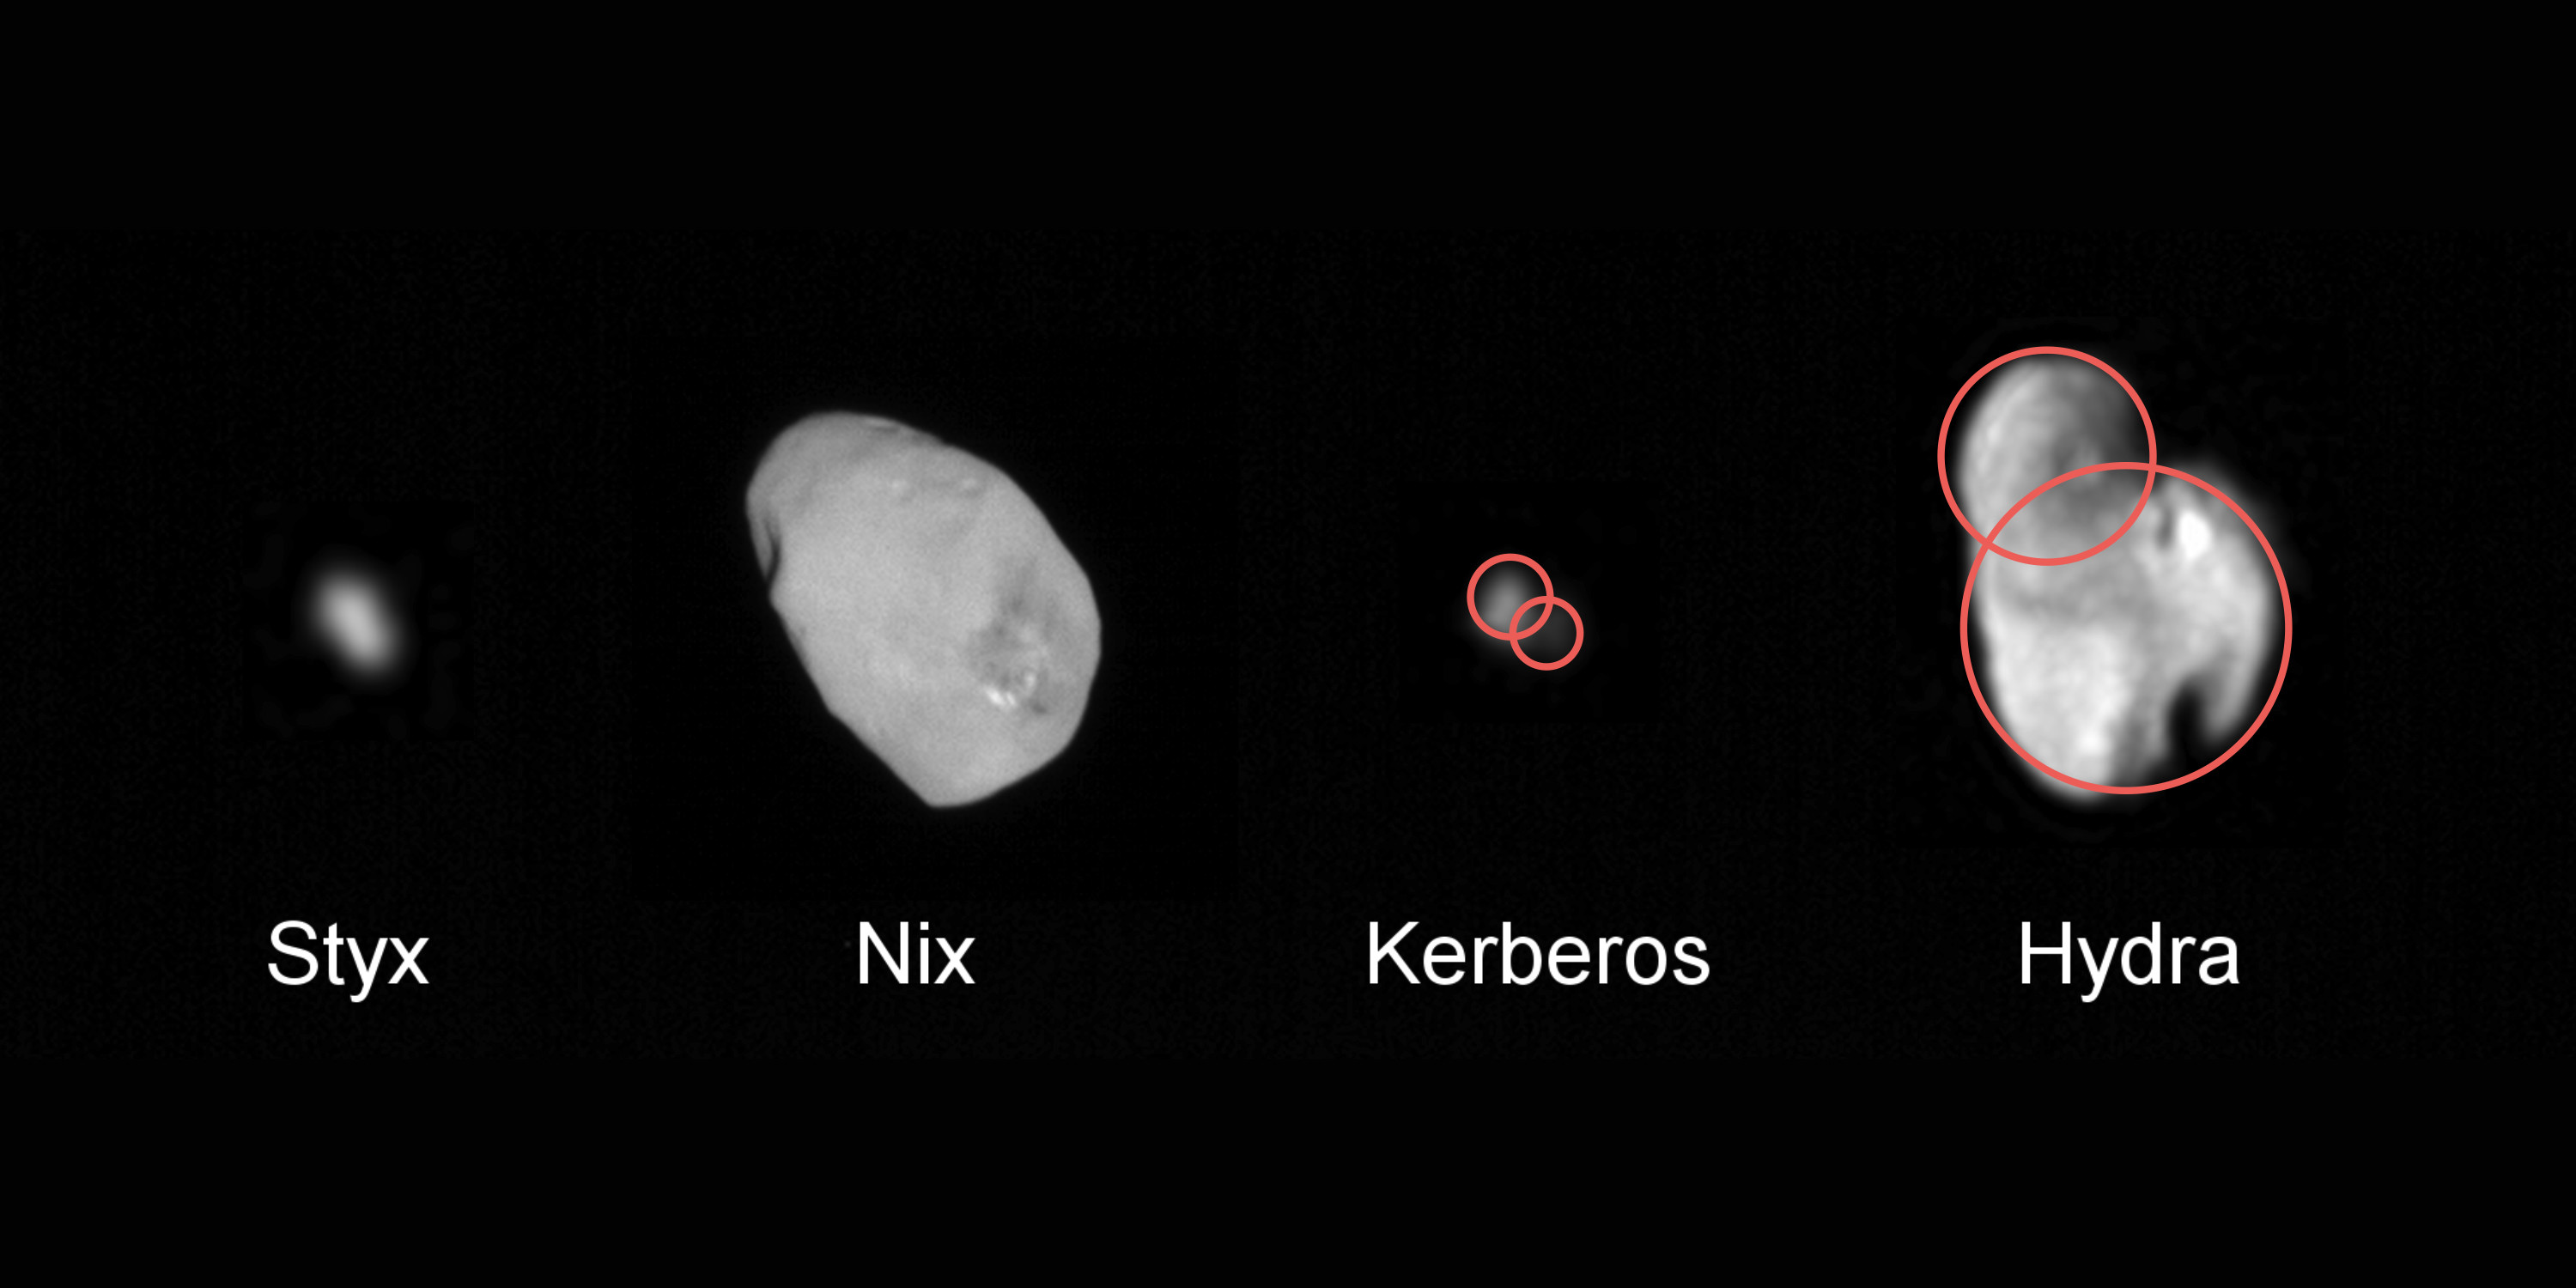 New Horizons data indicates that at least two and possibly all four of Plutos